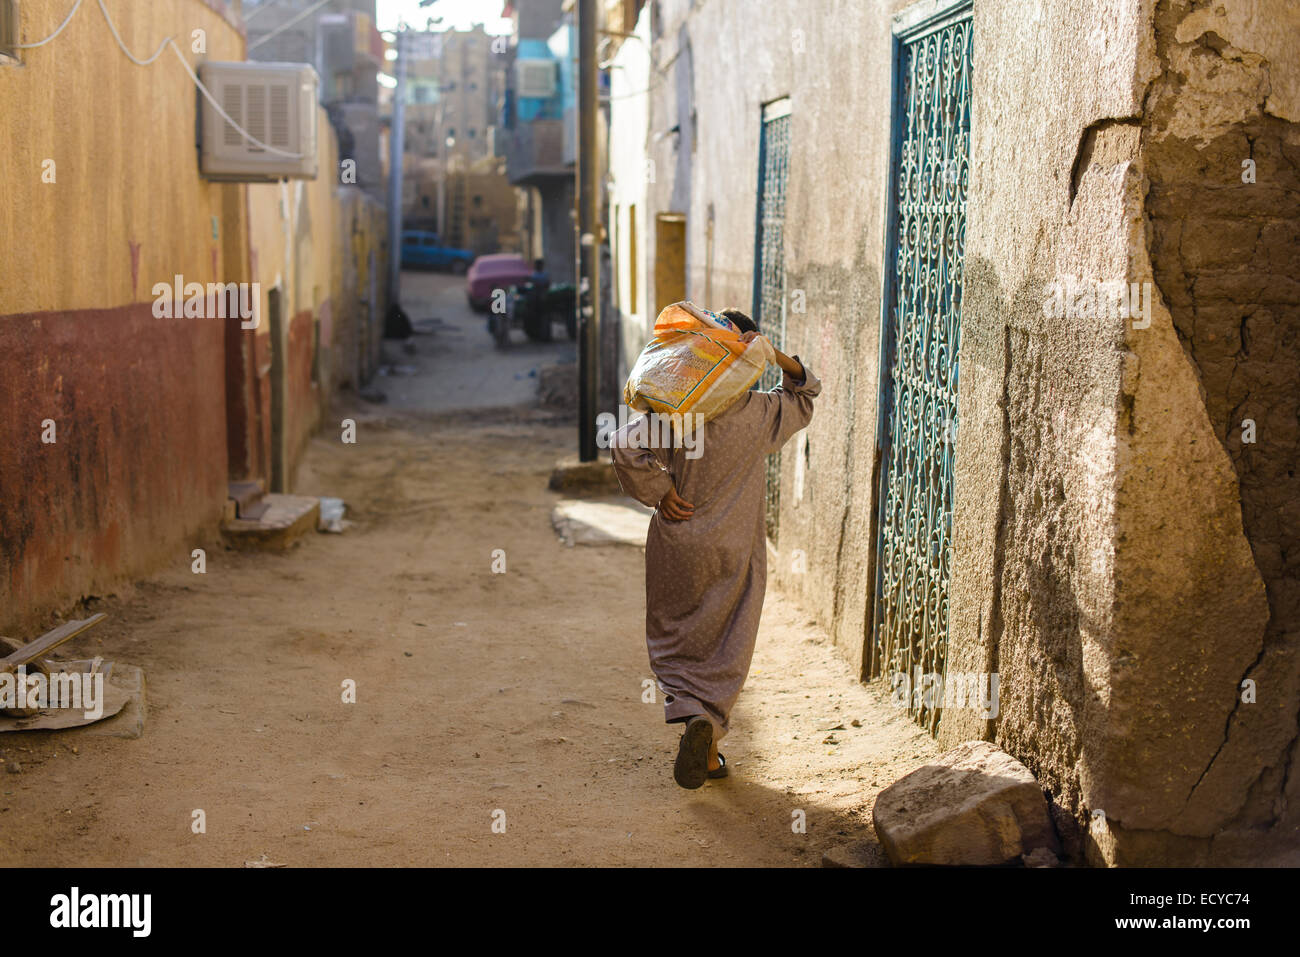 Man carrying sack on the streets of Aswan, Egypt Stock Photo